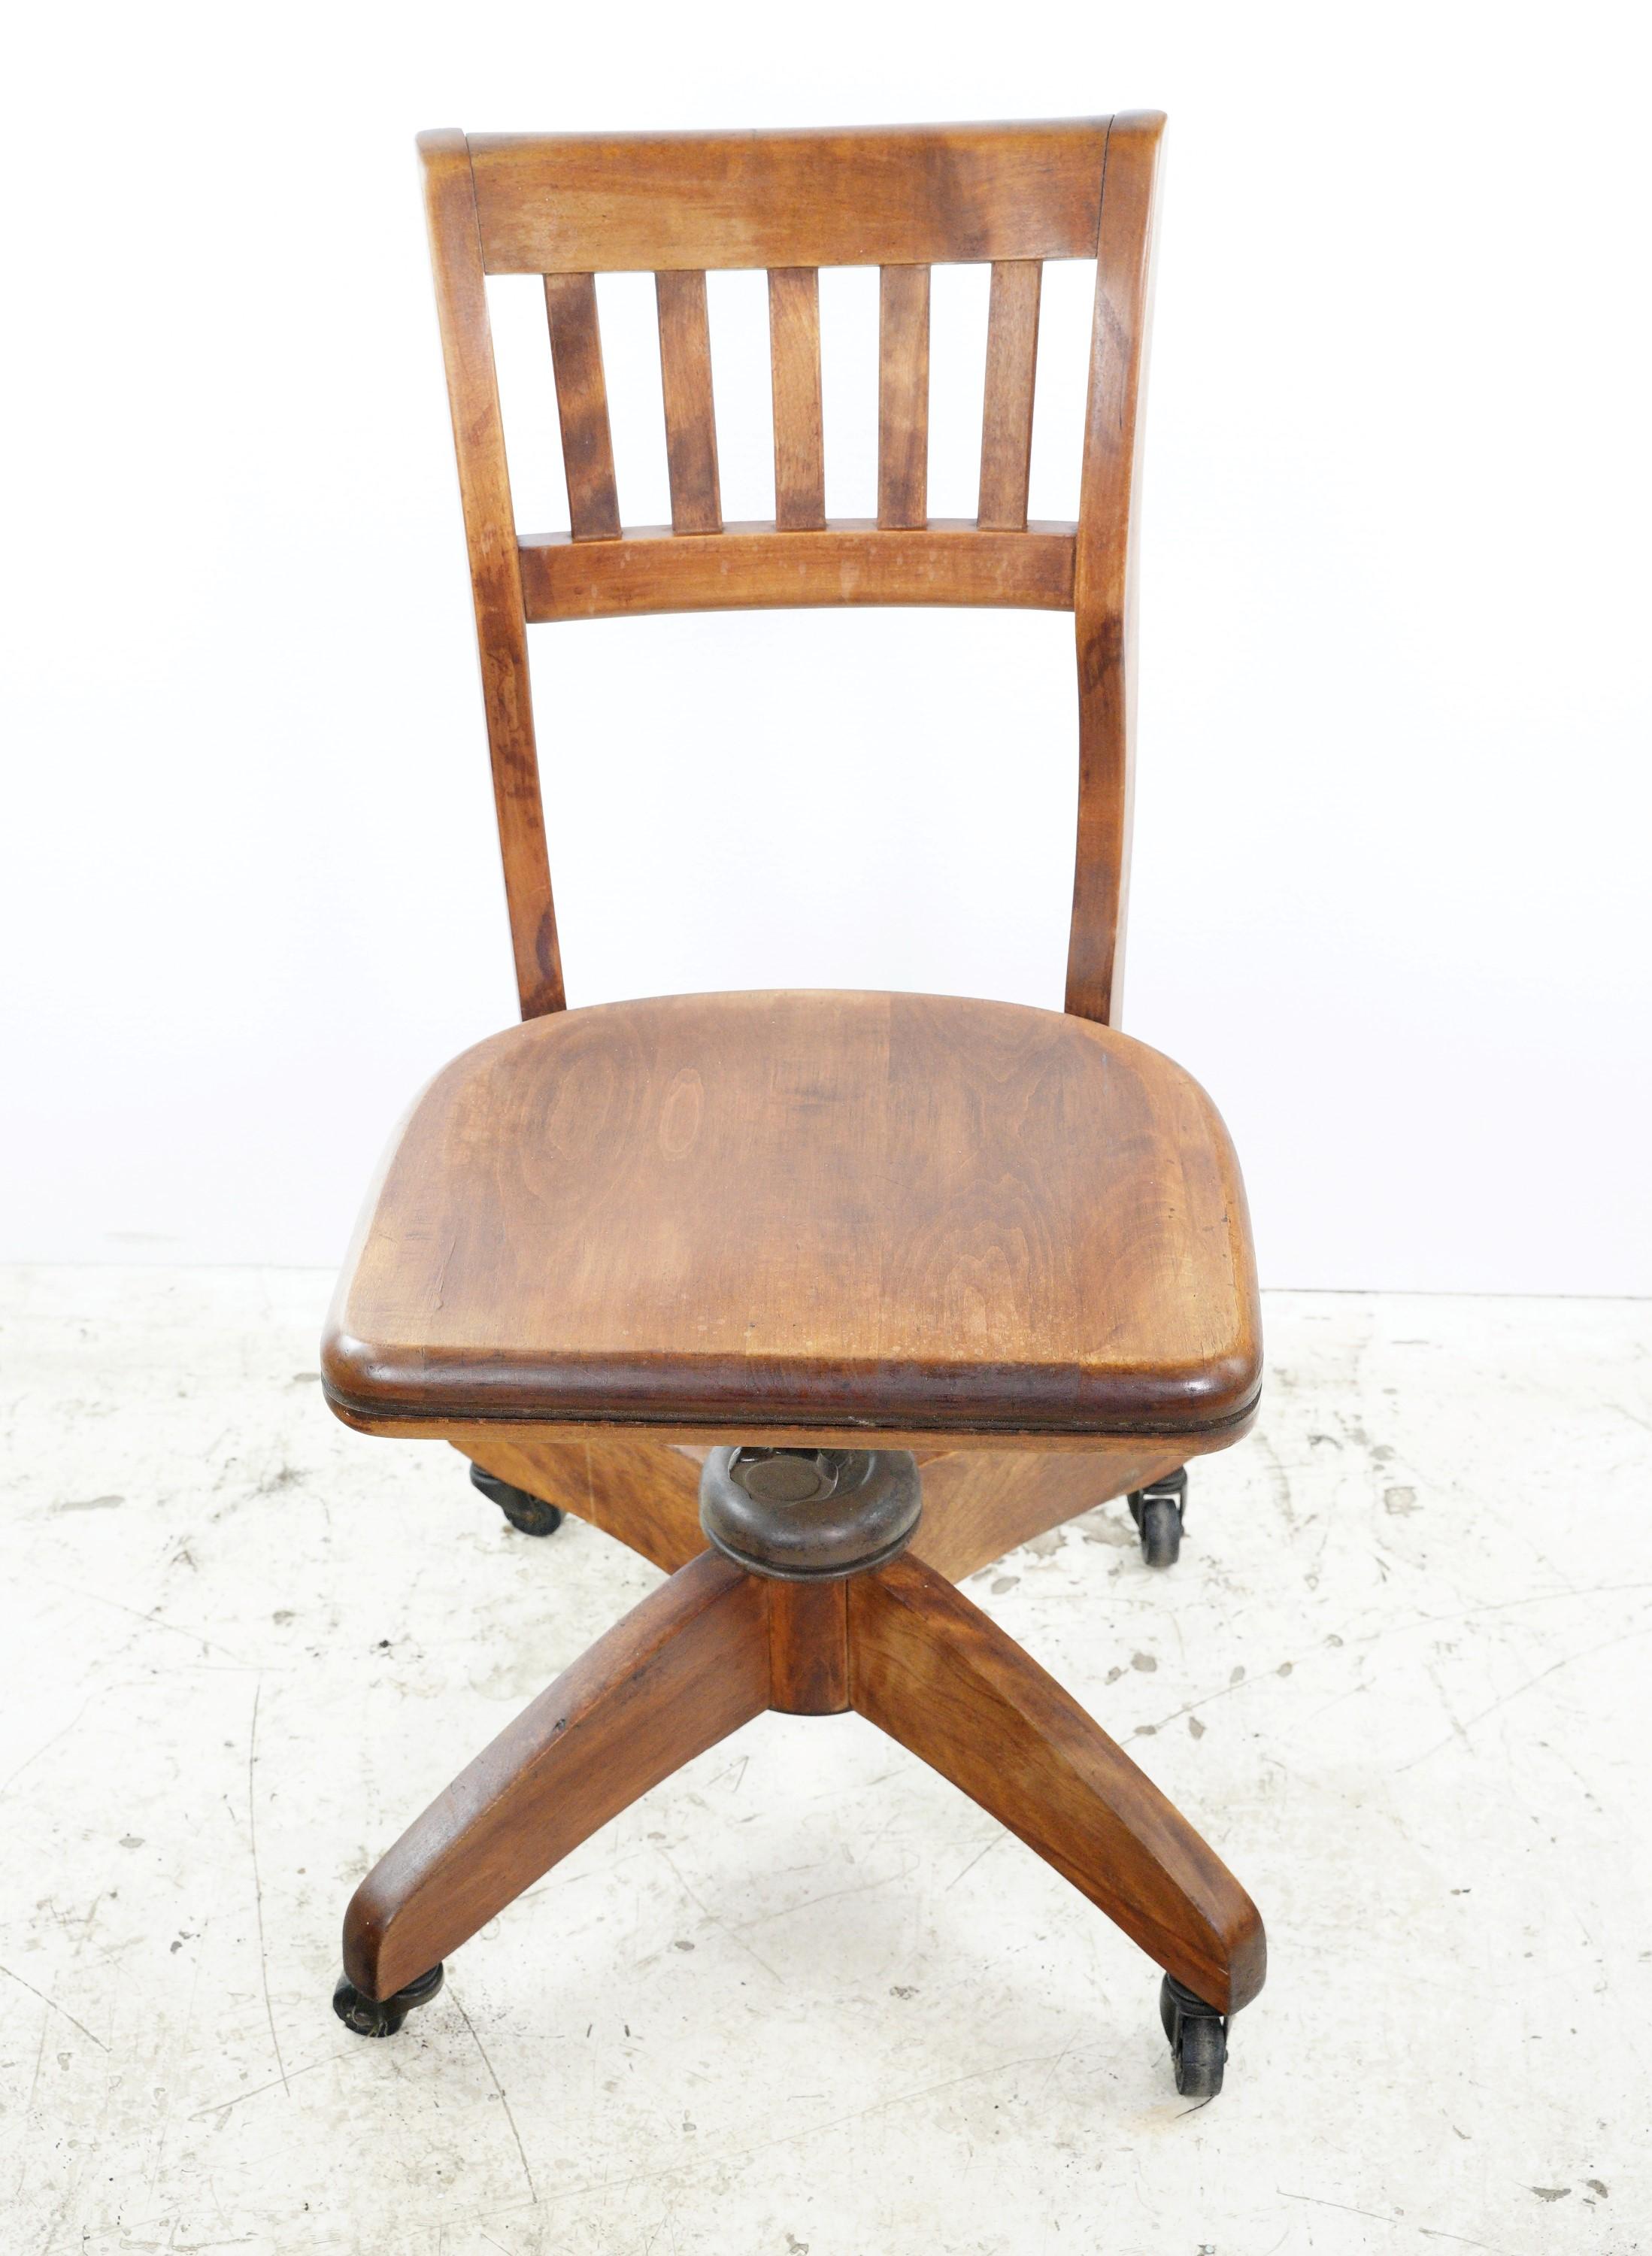 The antique adjustable height wooden desk chair with casters combines vintage style with practicality, offering mobility and comfort for productive workspaces. It is in good condition with age appropriate wear. Please note, this item is located in